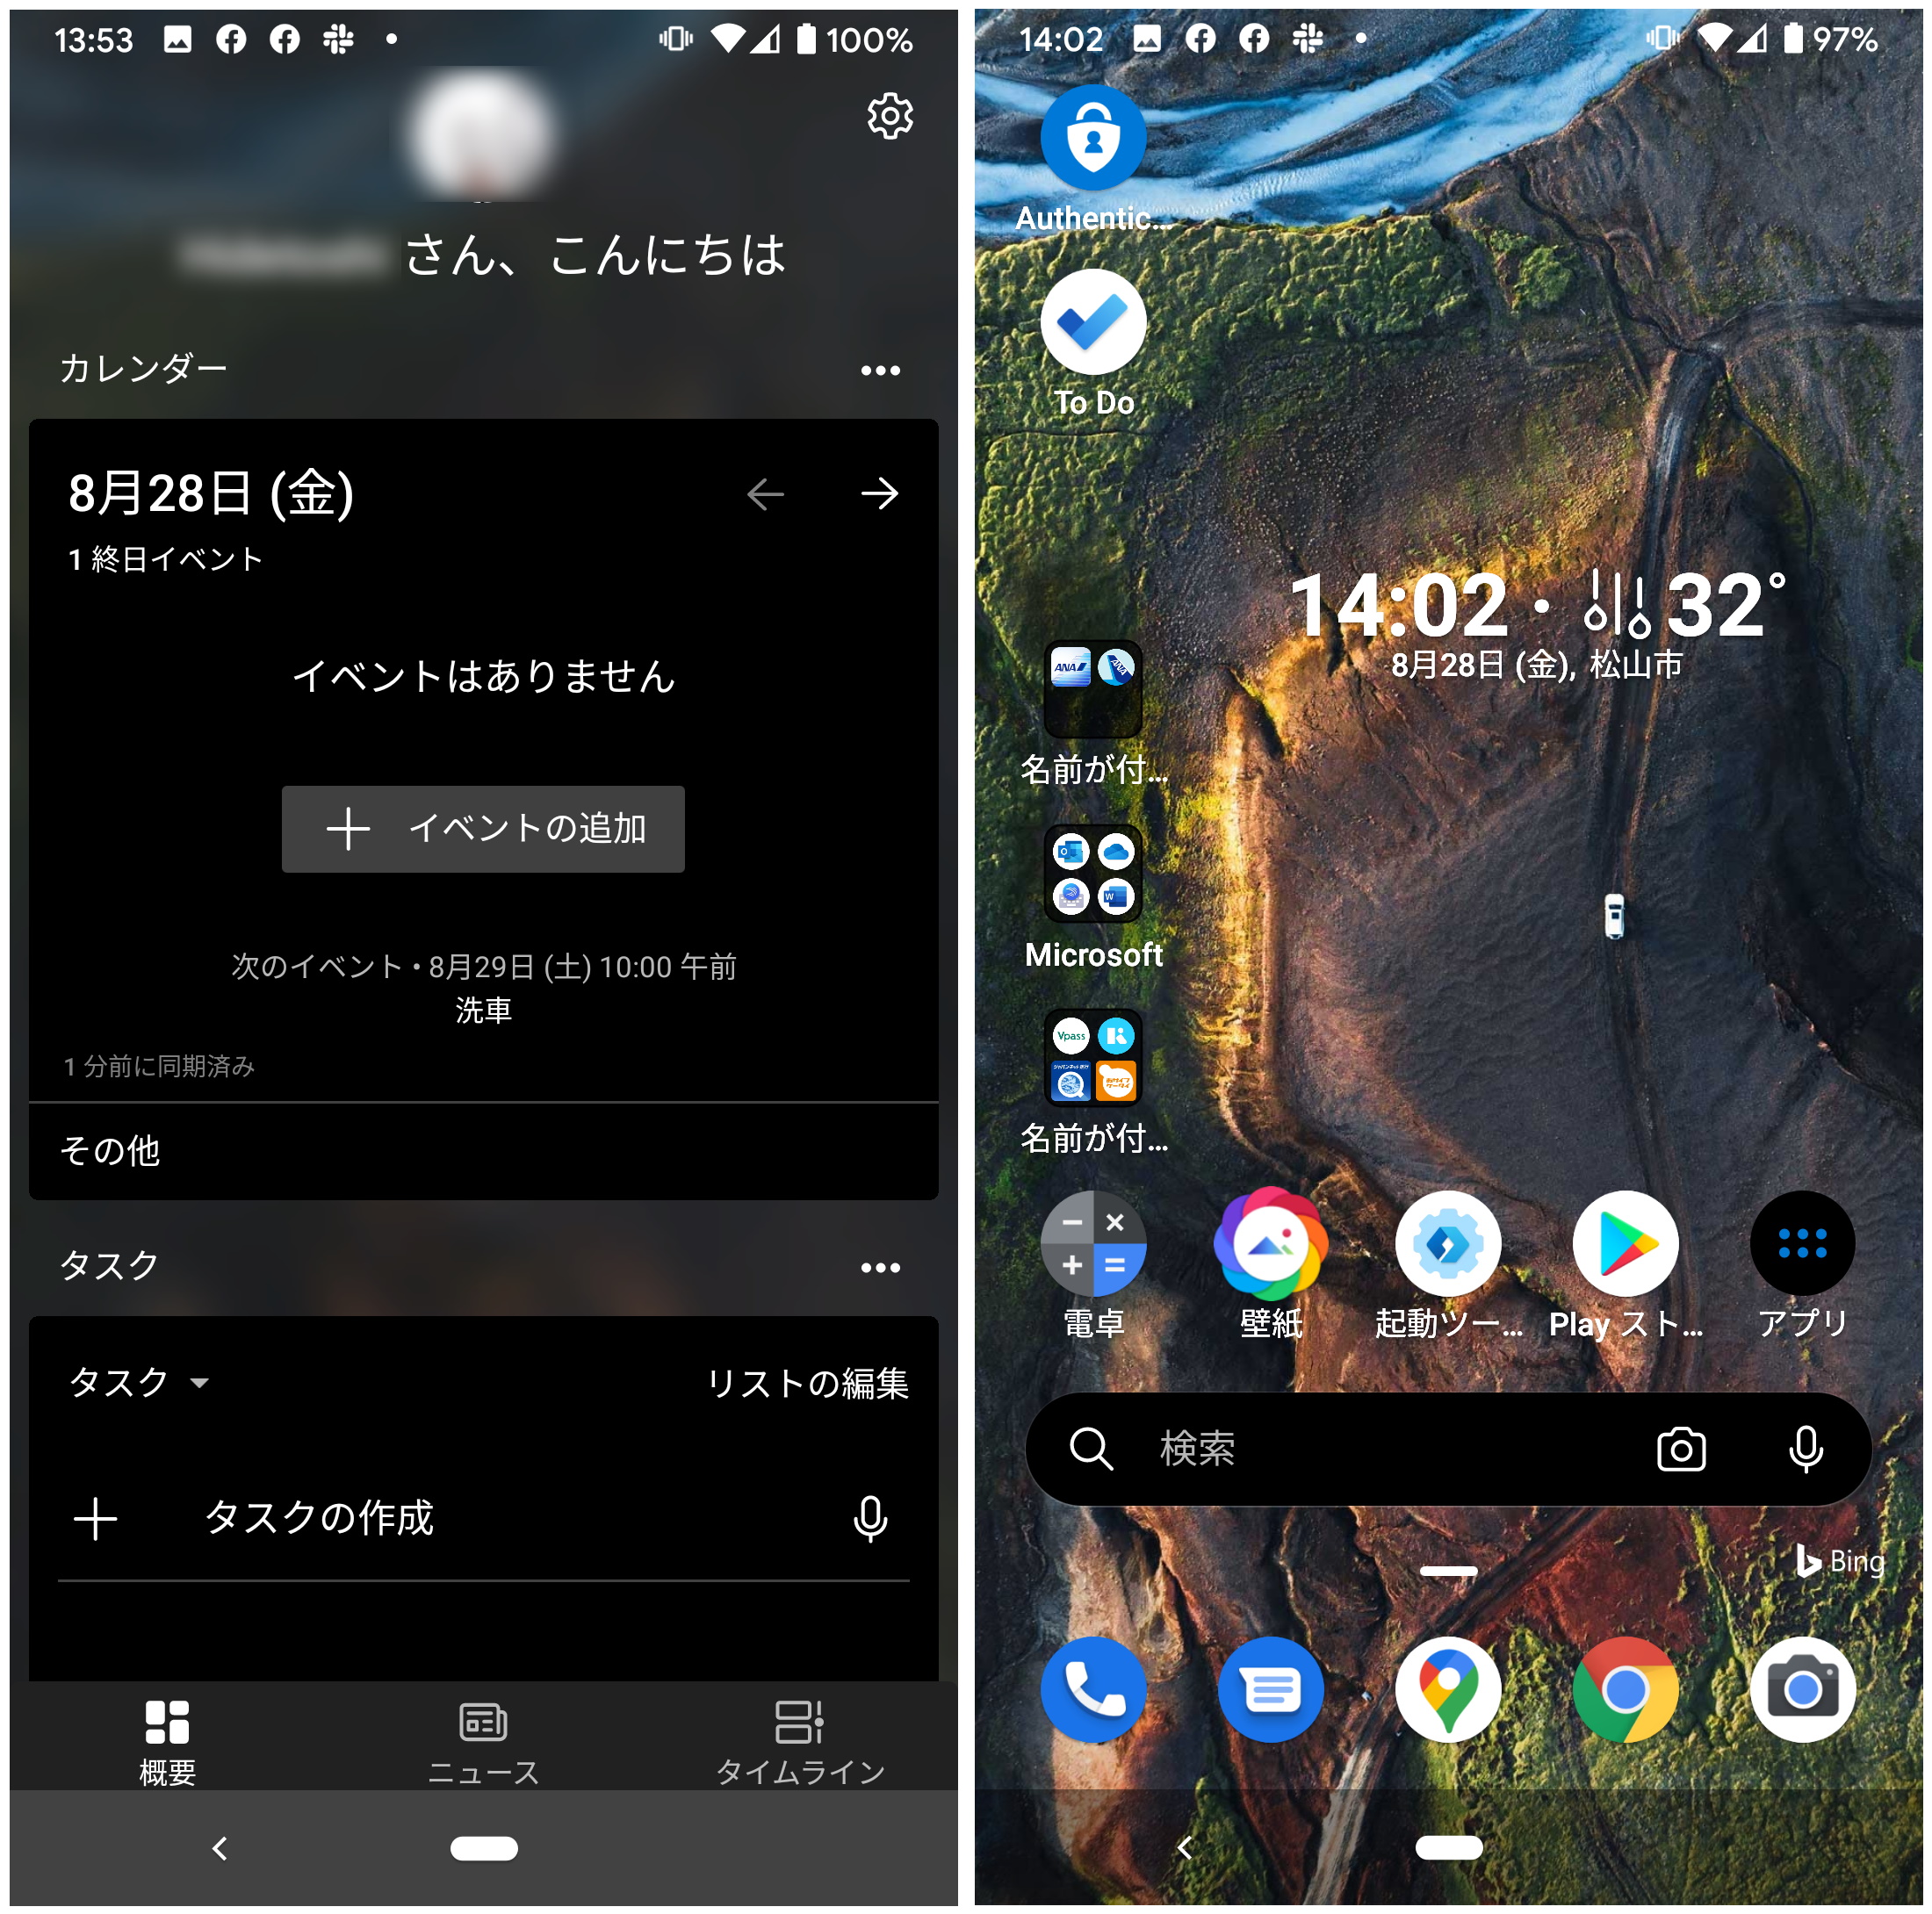 Android向けホーム画面アプリ Microsoft Launcher 6 2 が配信開始 窓の杜